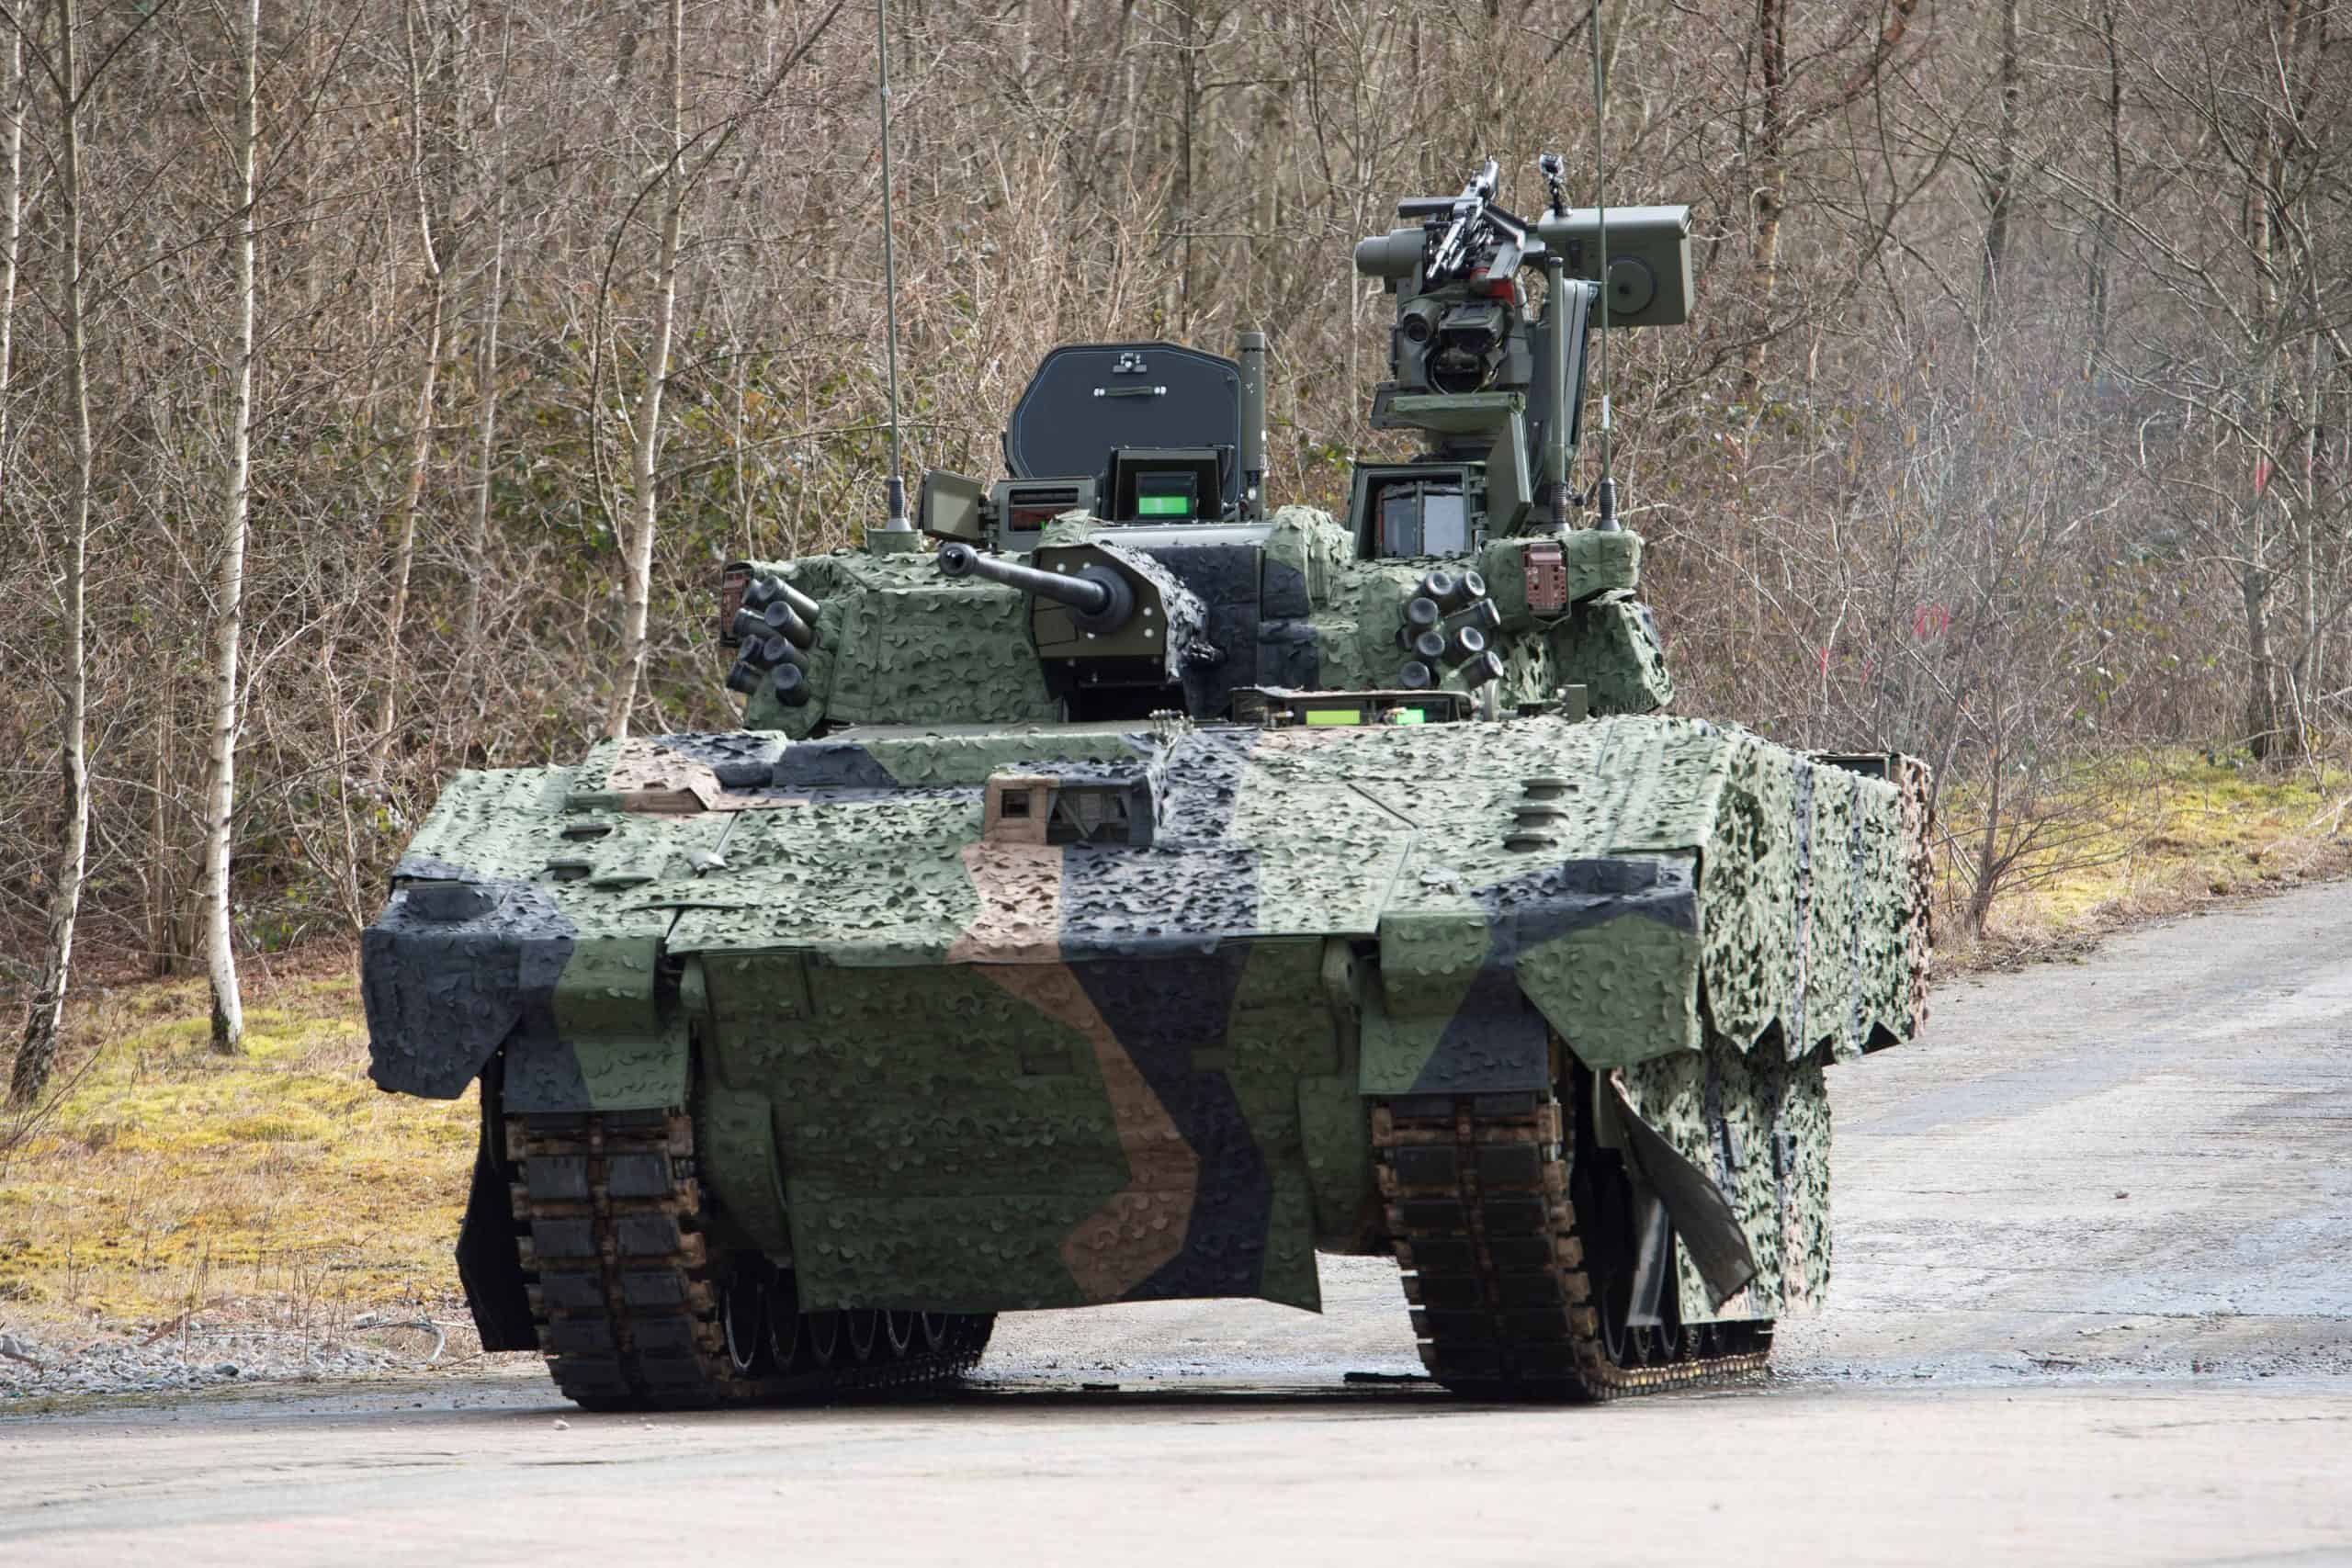 £5.5bn down the drain? Problems with Army’s Ajax light tank may never be solved